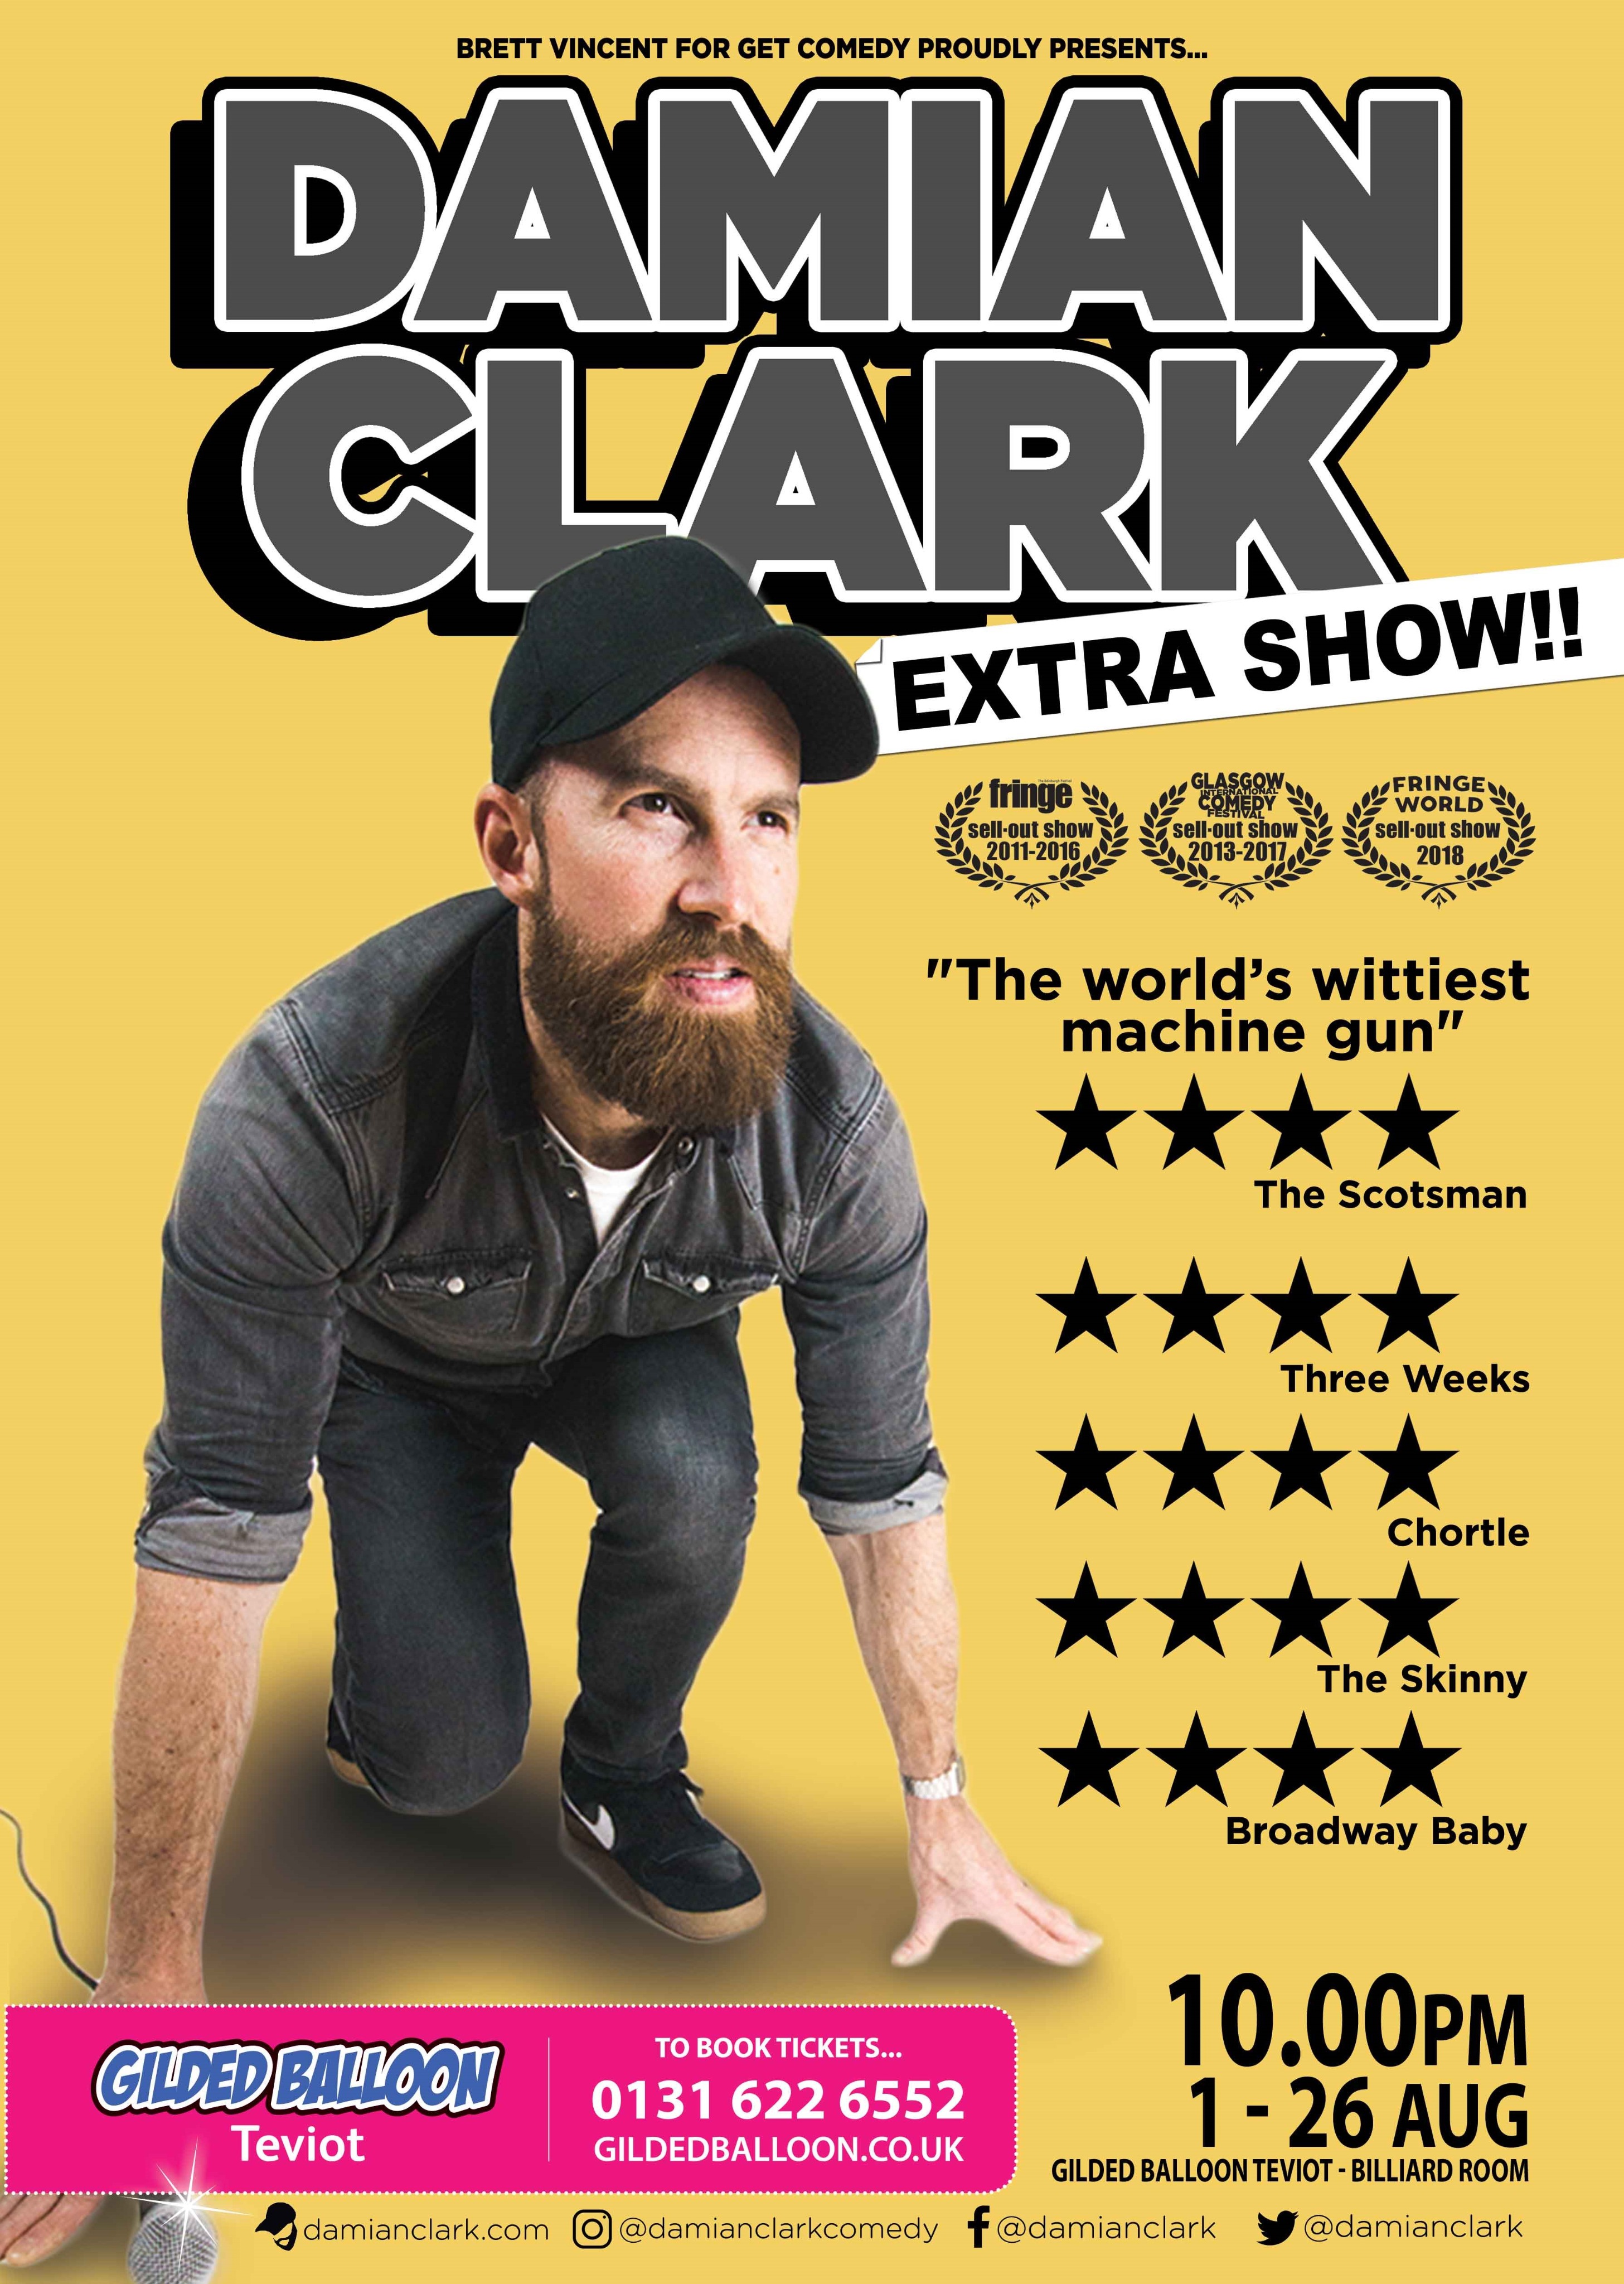 The poster for Damian Clark: Extra Show